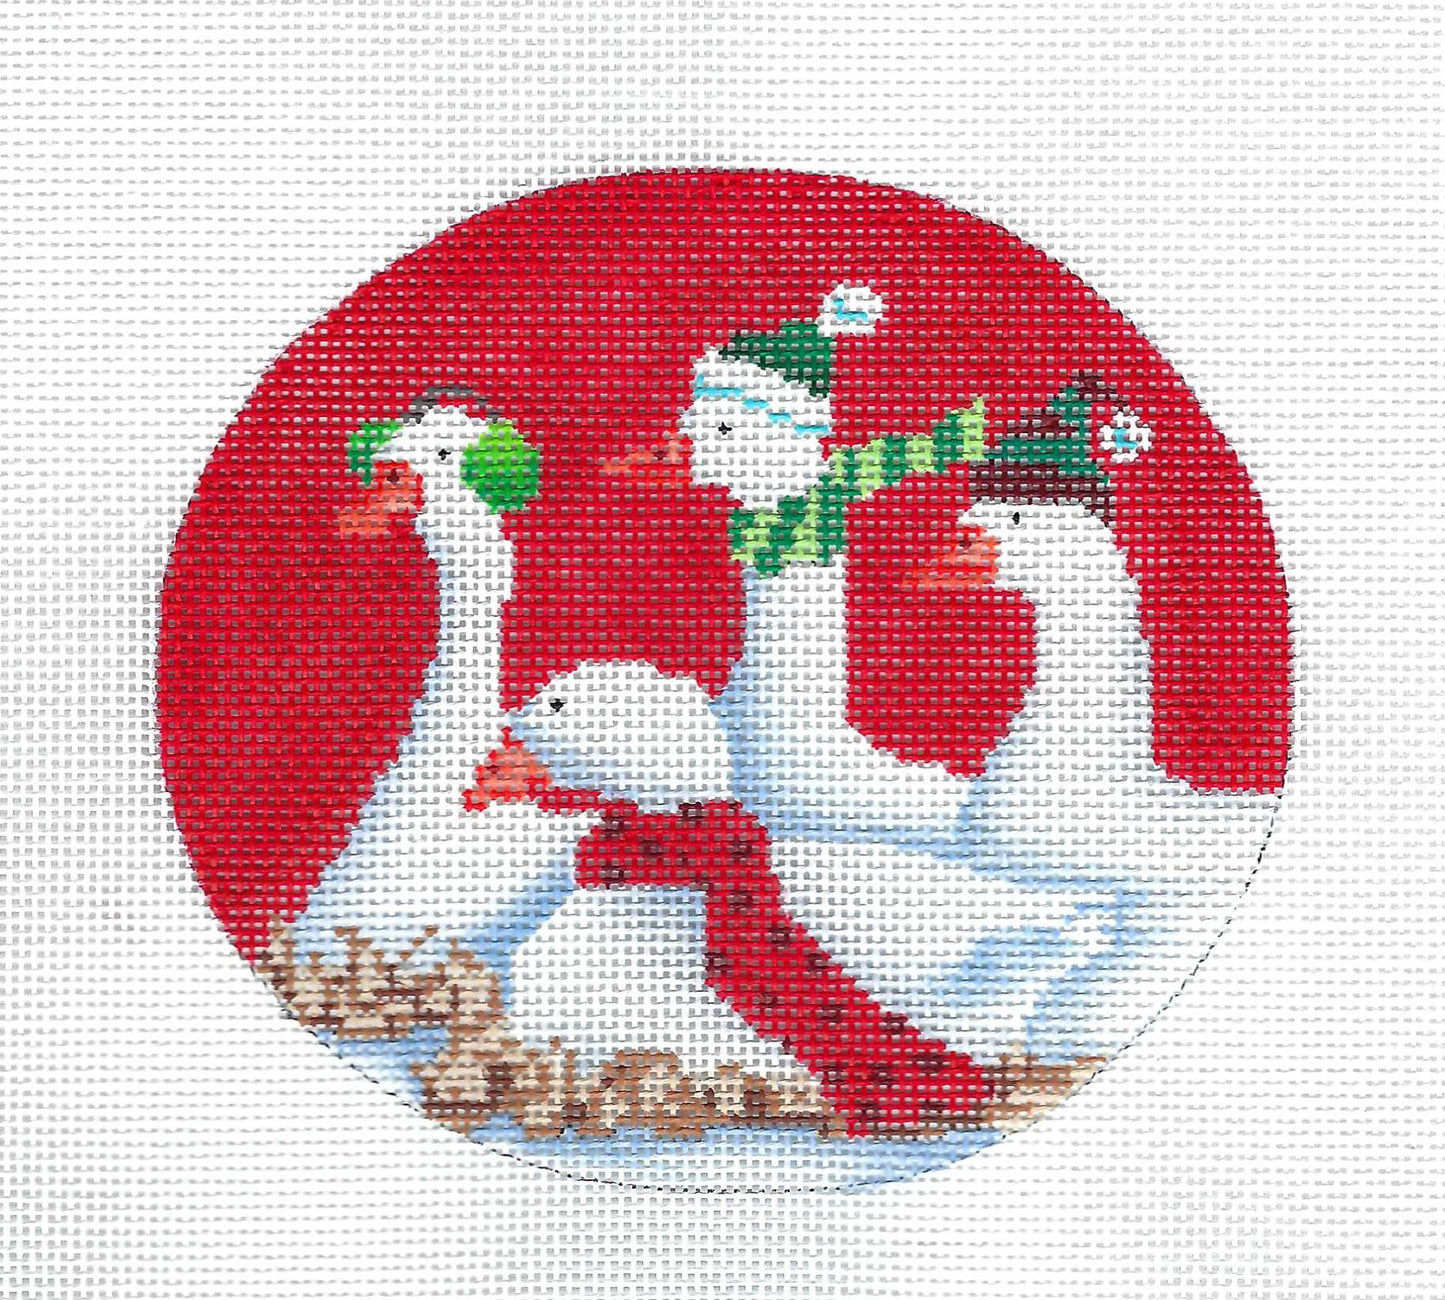 Bird Oval ~ 4 Christmas Geese in scarves & hats Sitting on Their Nest handpainted Needlepoint Canvas from Scott Church